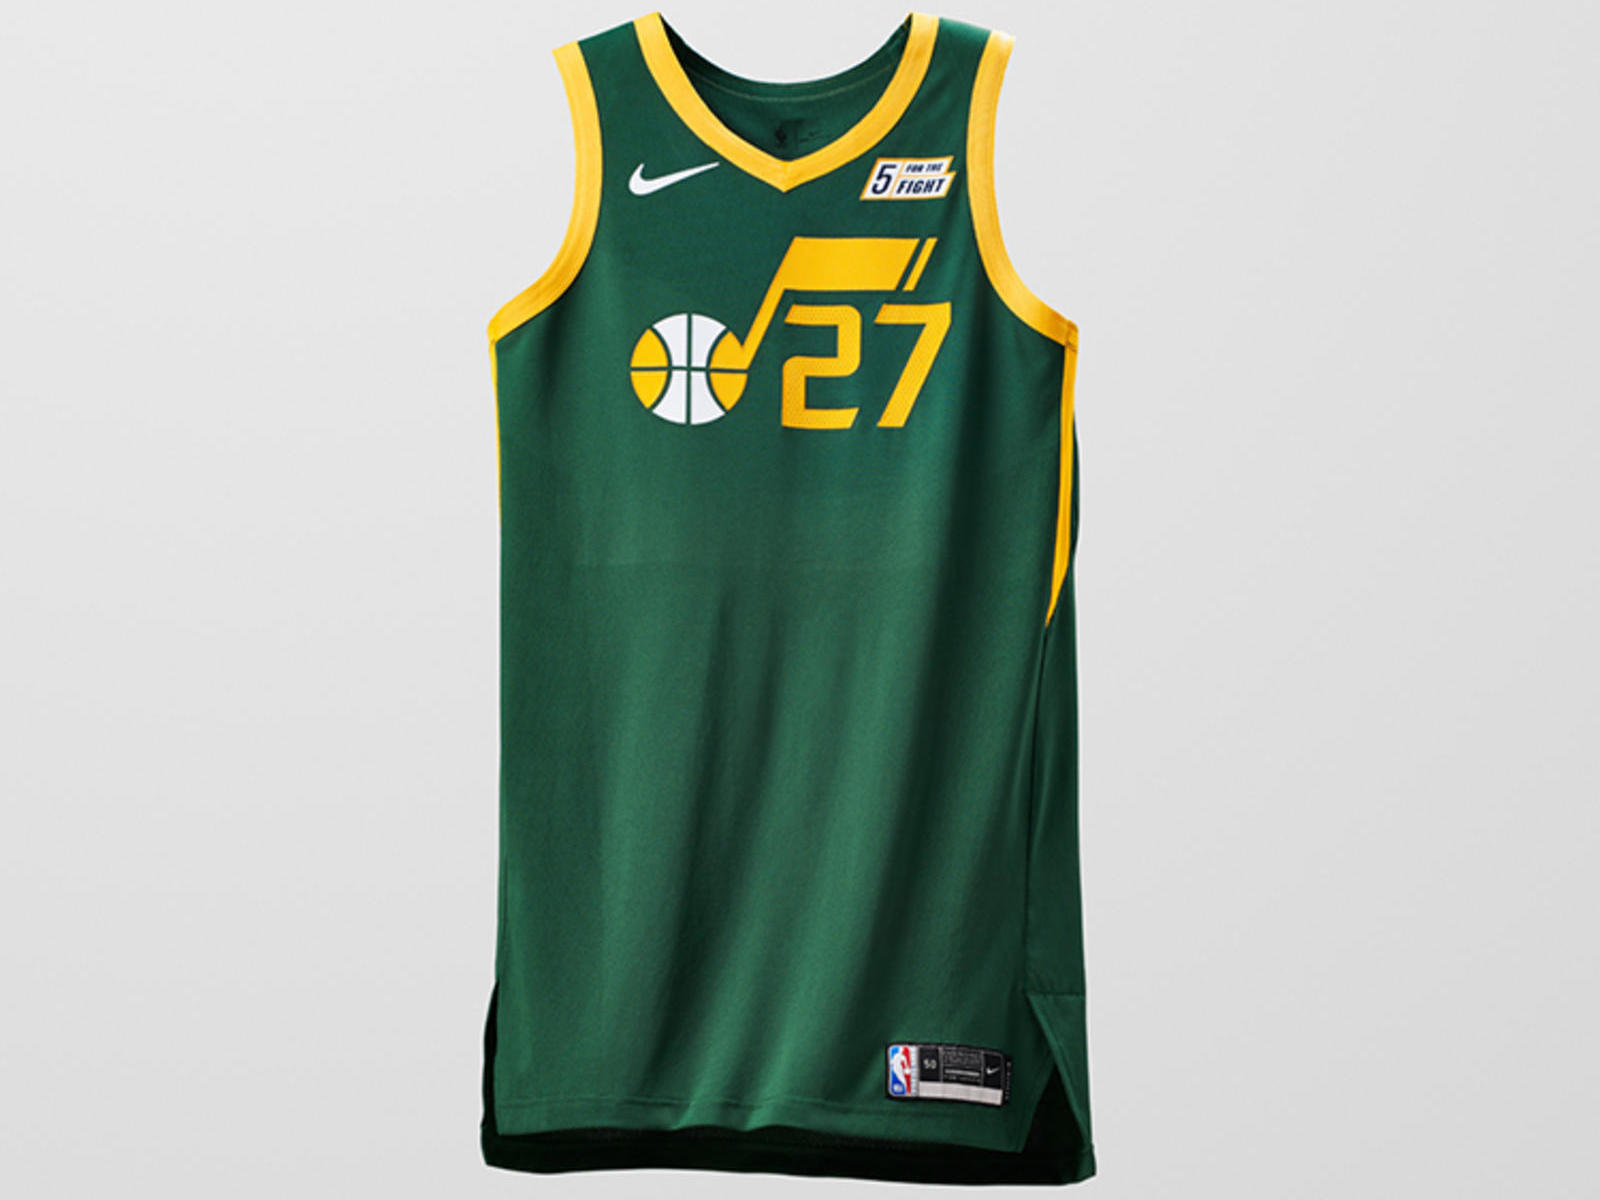 Nike has released NBA Earned Edition Uniforms - YOMZANSI. Documenting THE  CULTURE